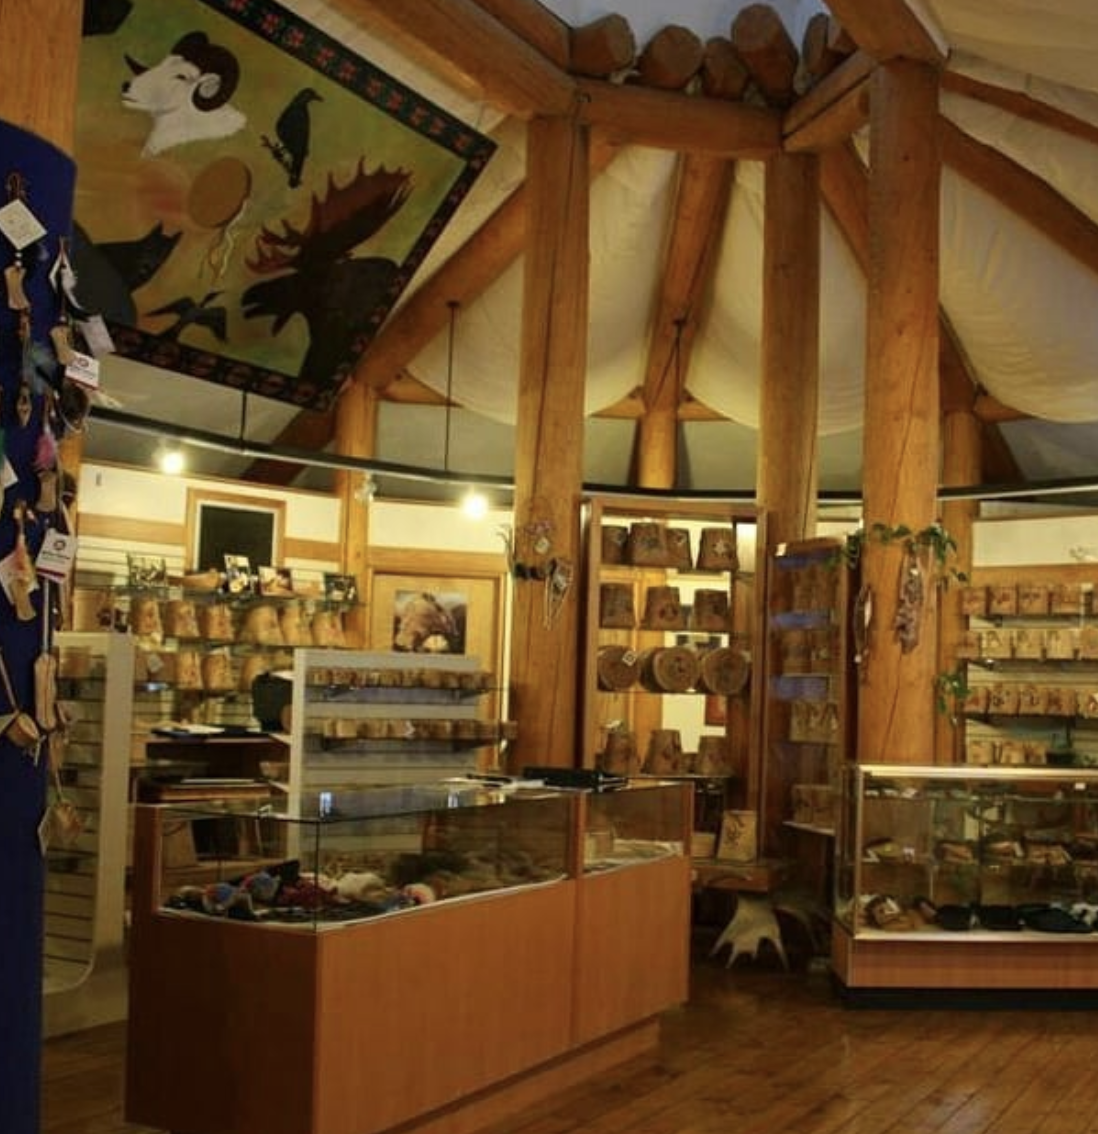 A shop with wooden pillars and full of displays of Native art pieces.